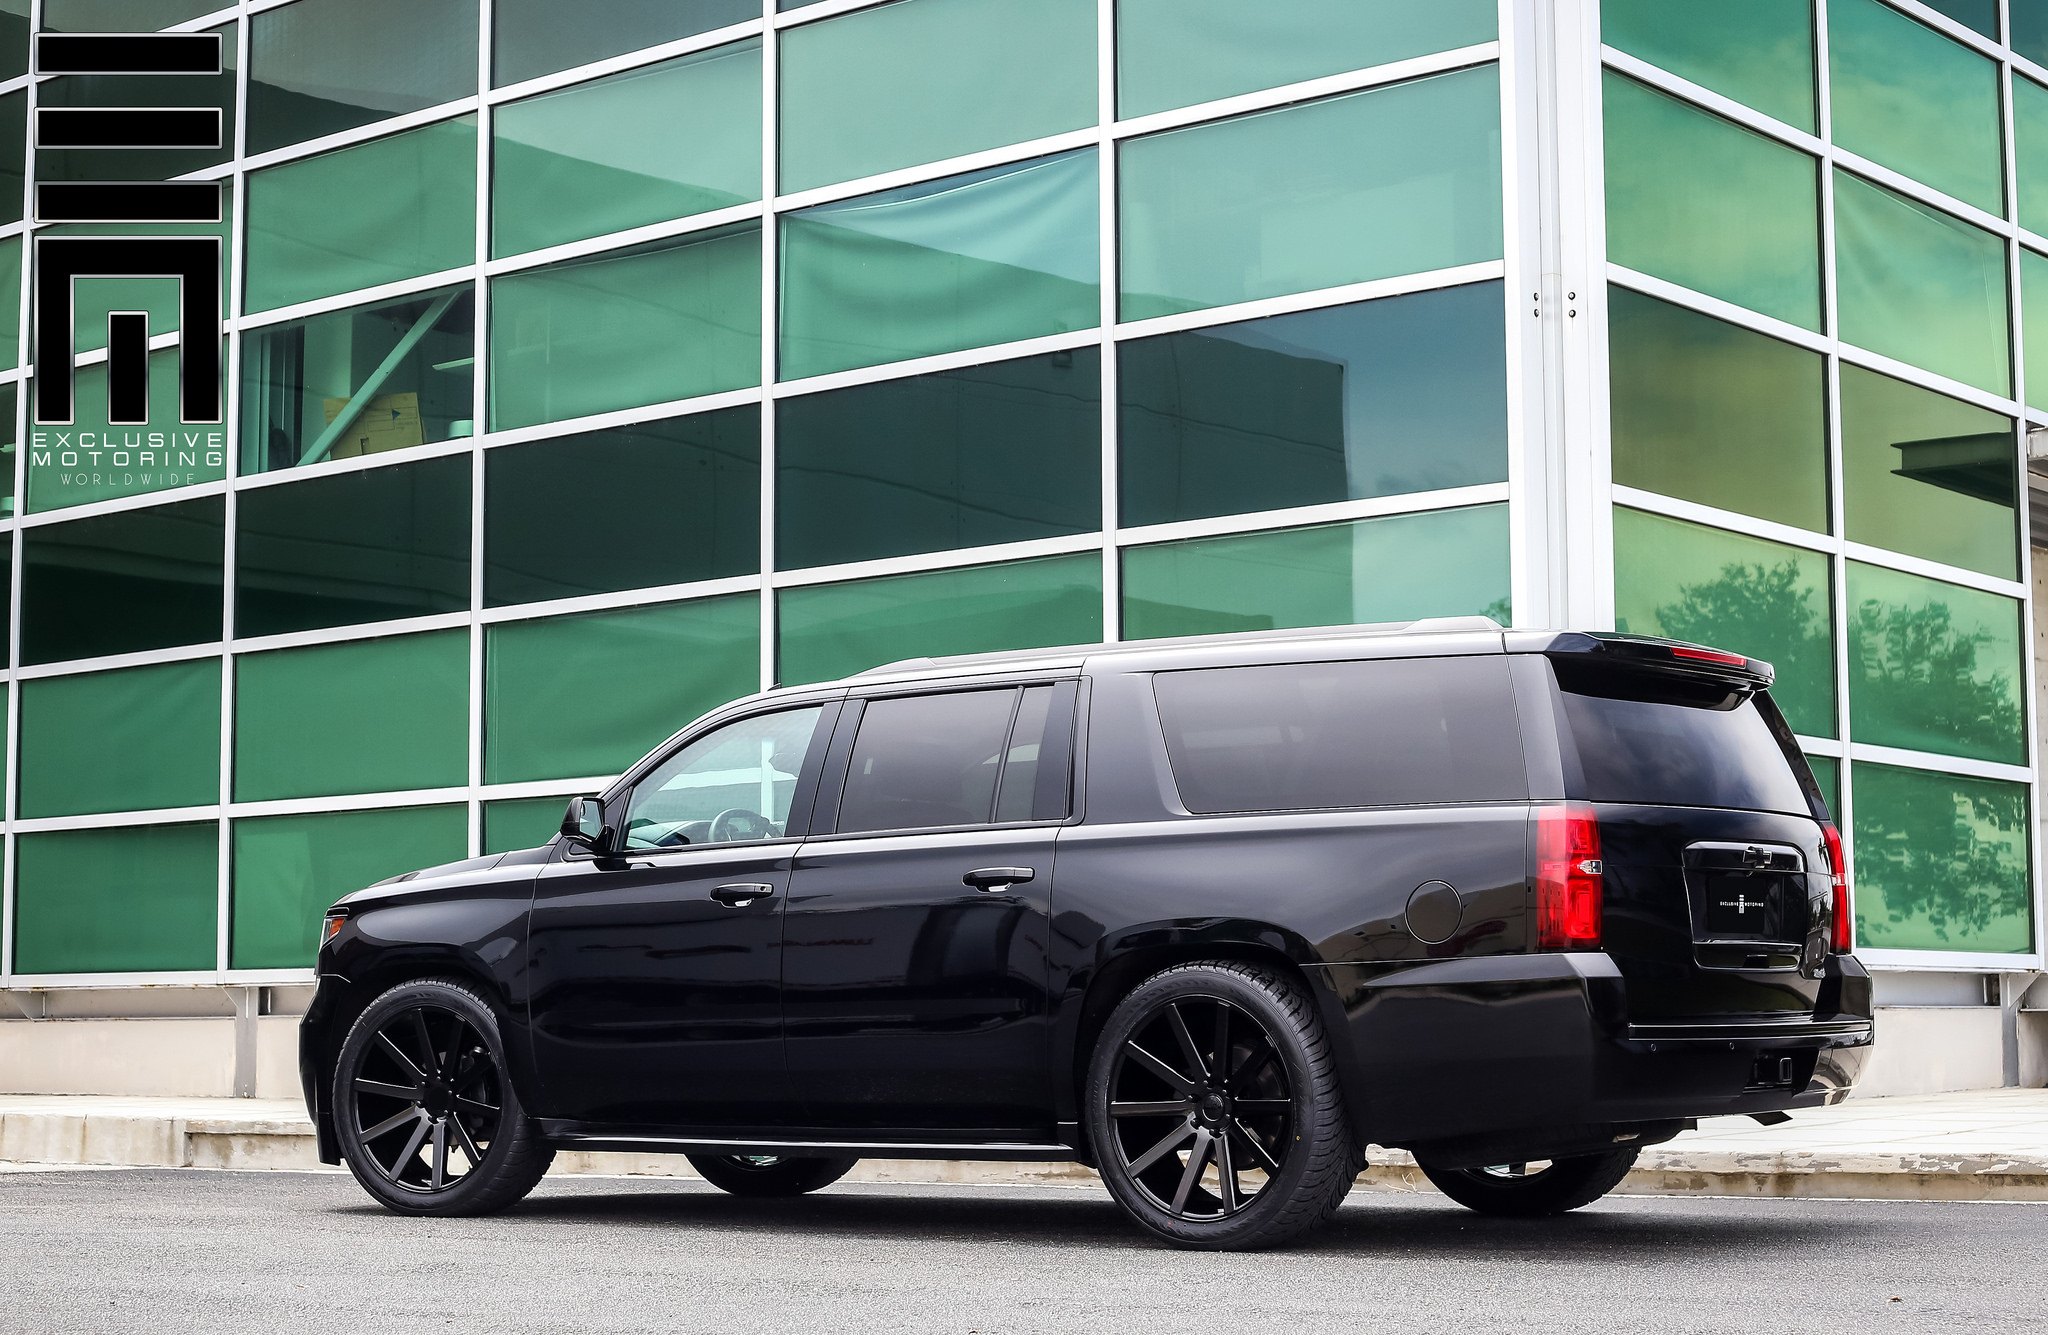 Murdered Out Chevrolet Suburban - Photo by Exclusive Motoring